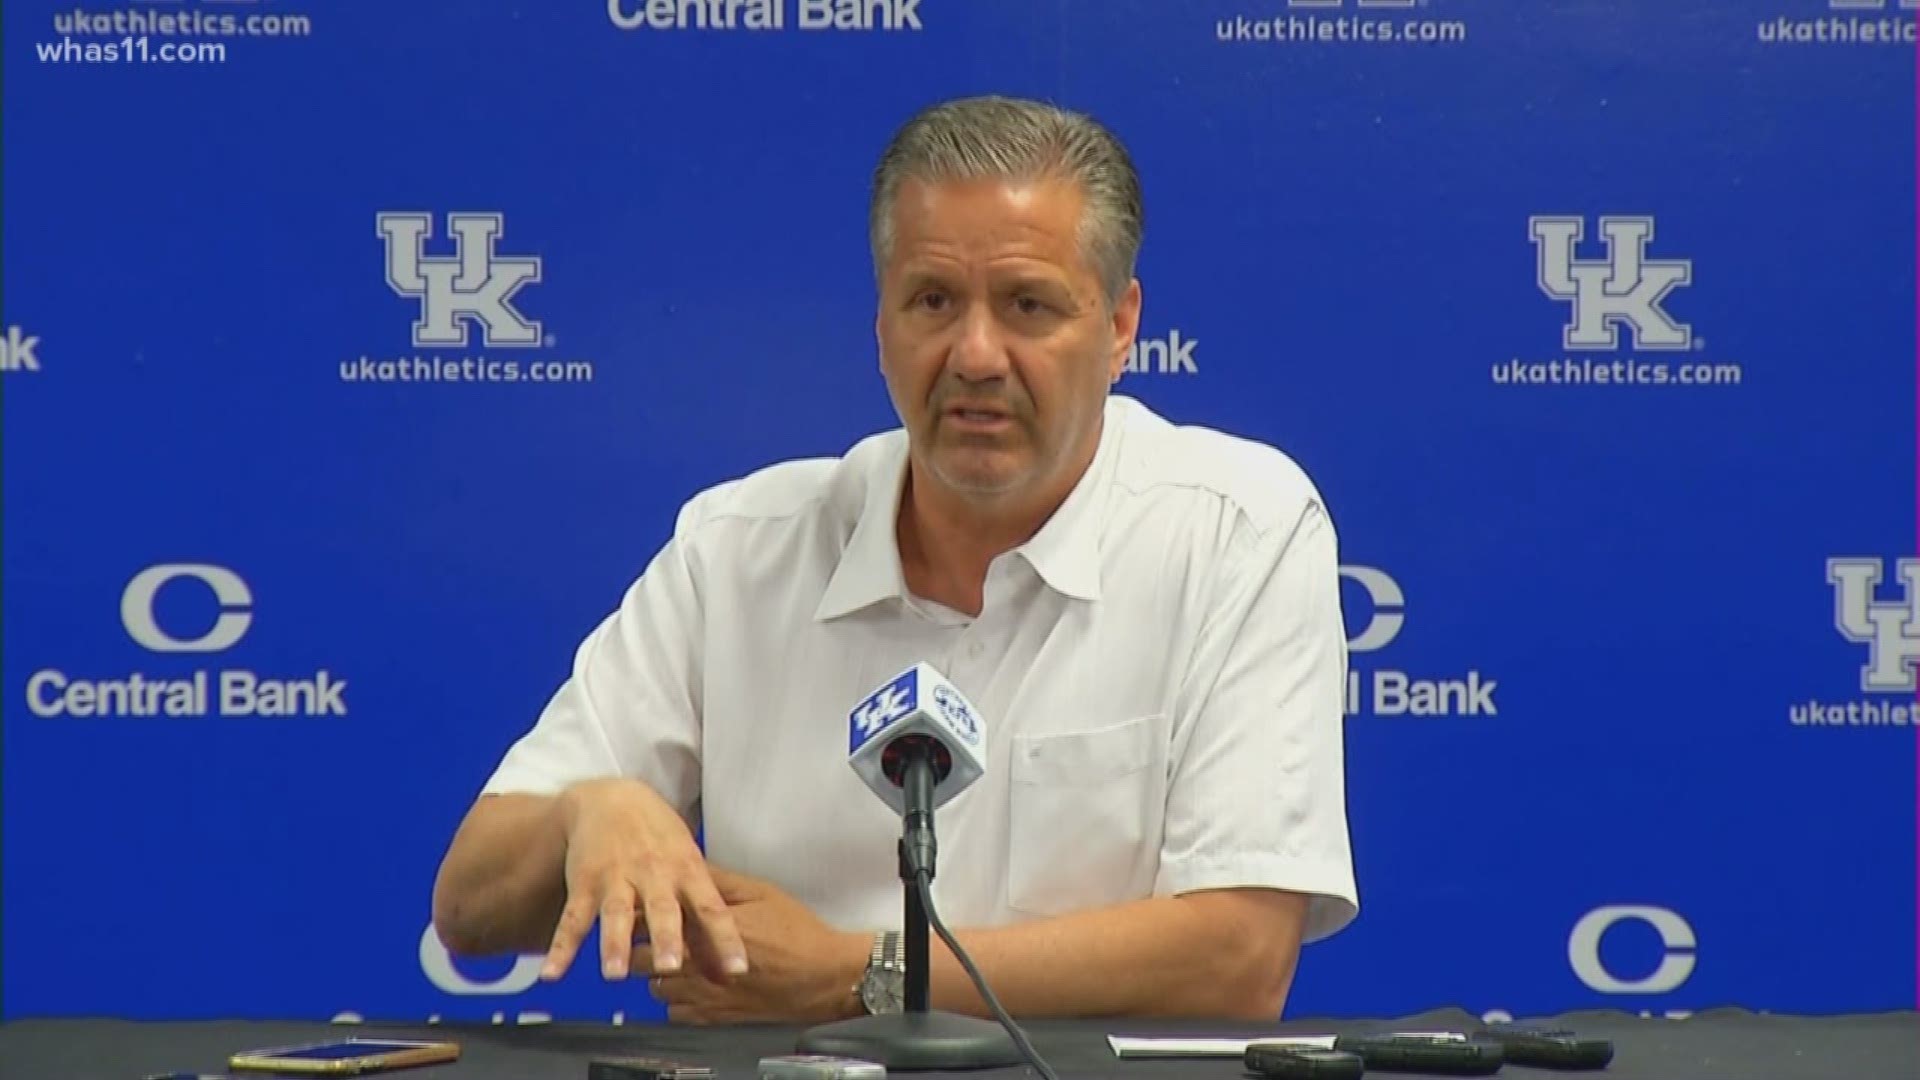 Coach Cal says he wants to retire from Kentucky and discusses his "lifetime contract" with the university.